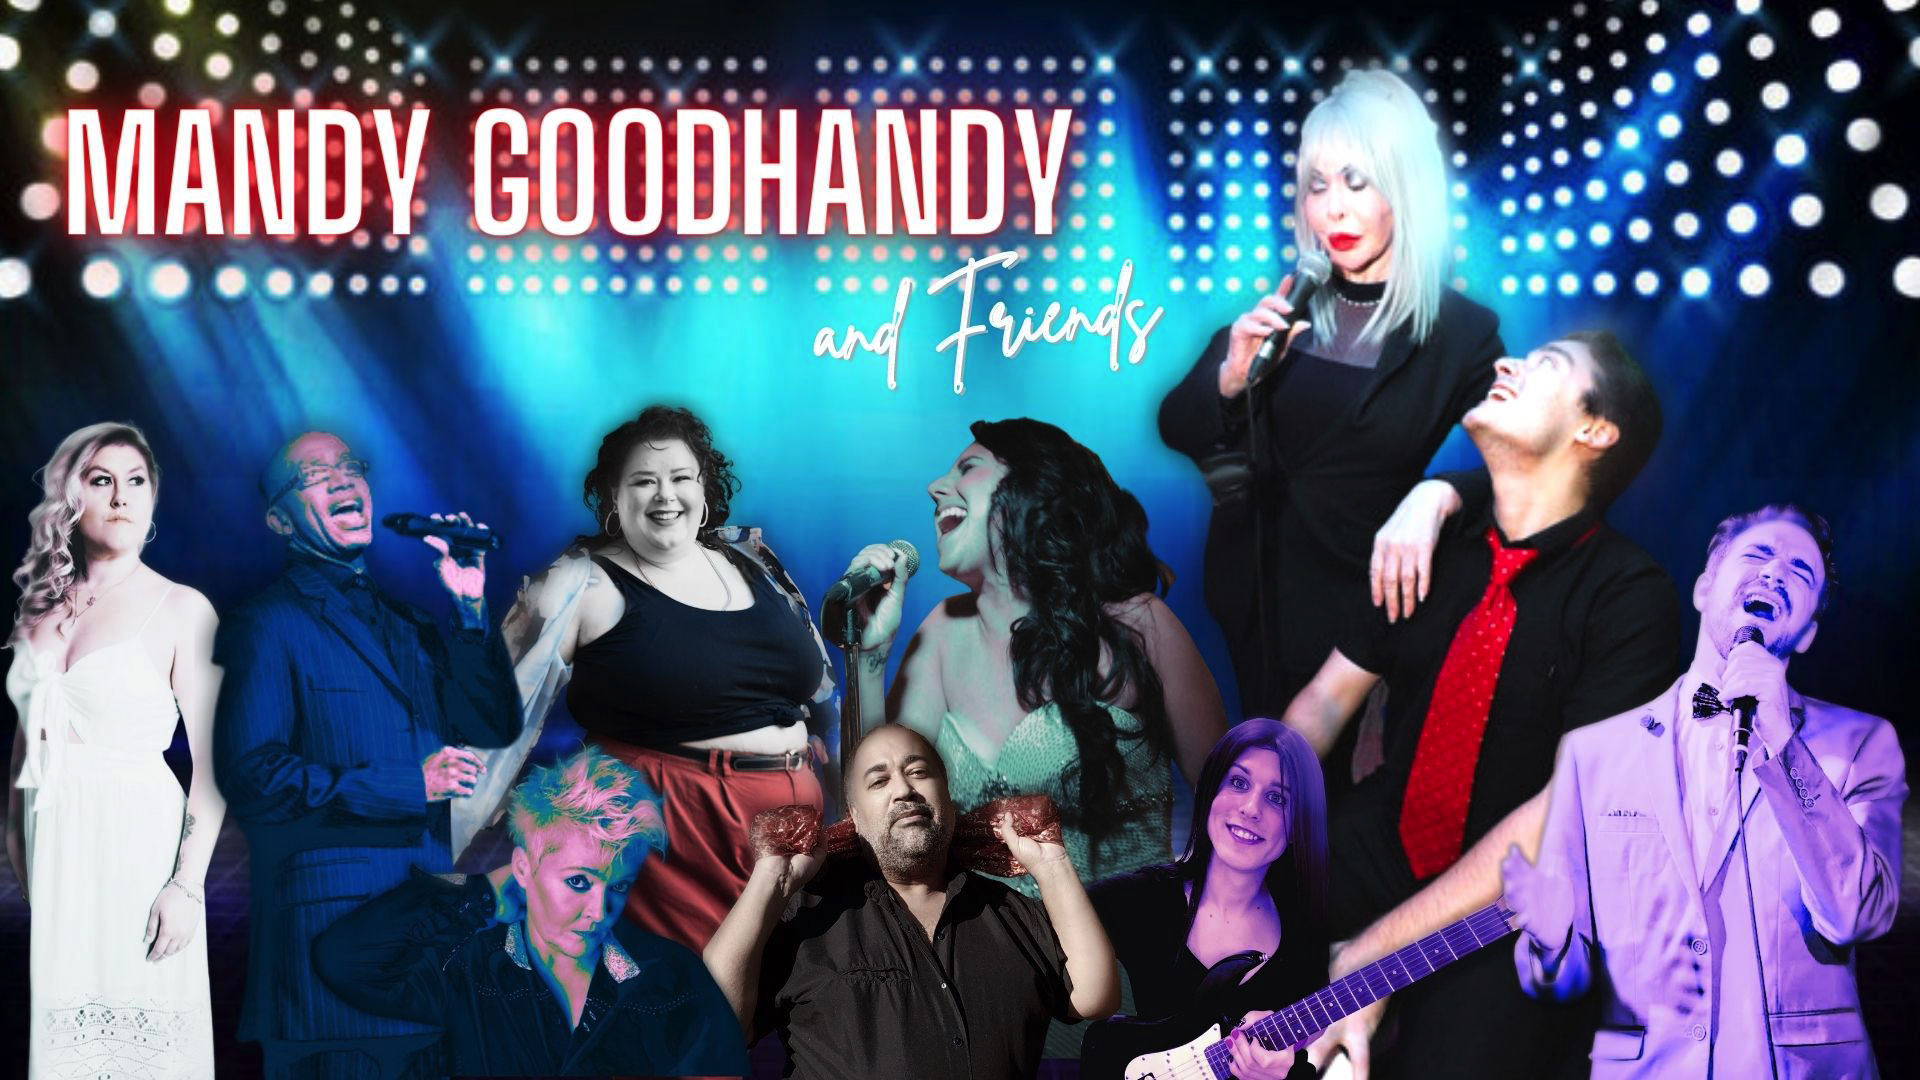 Mandy Goodhandy and Friends Event